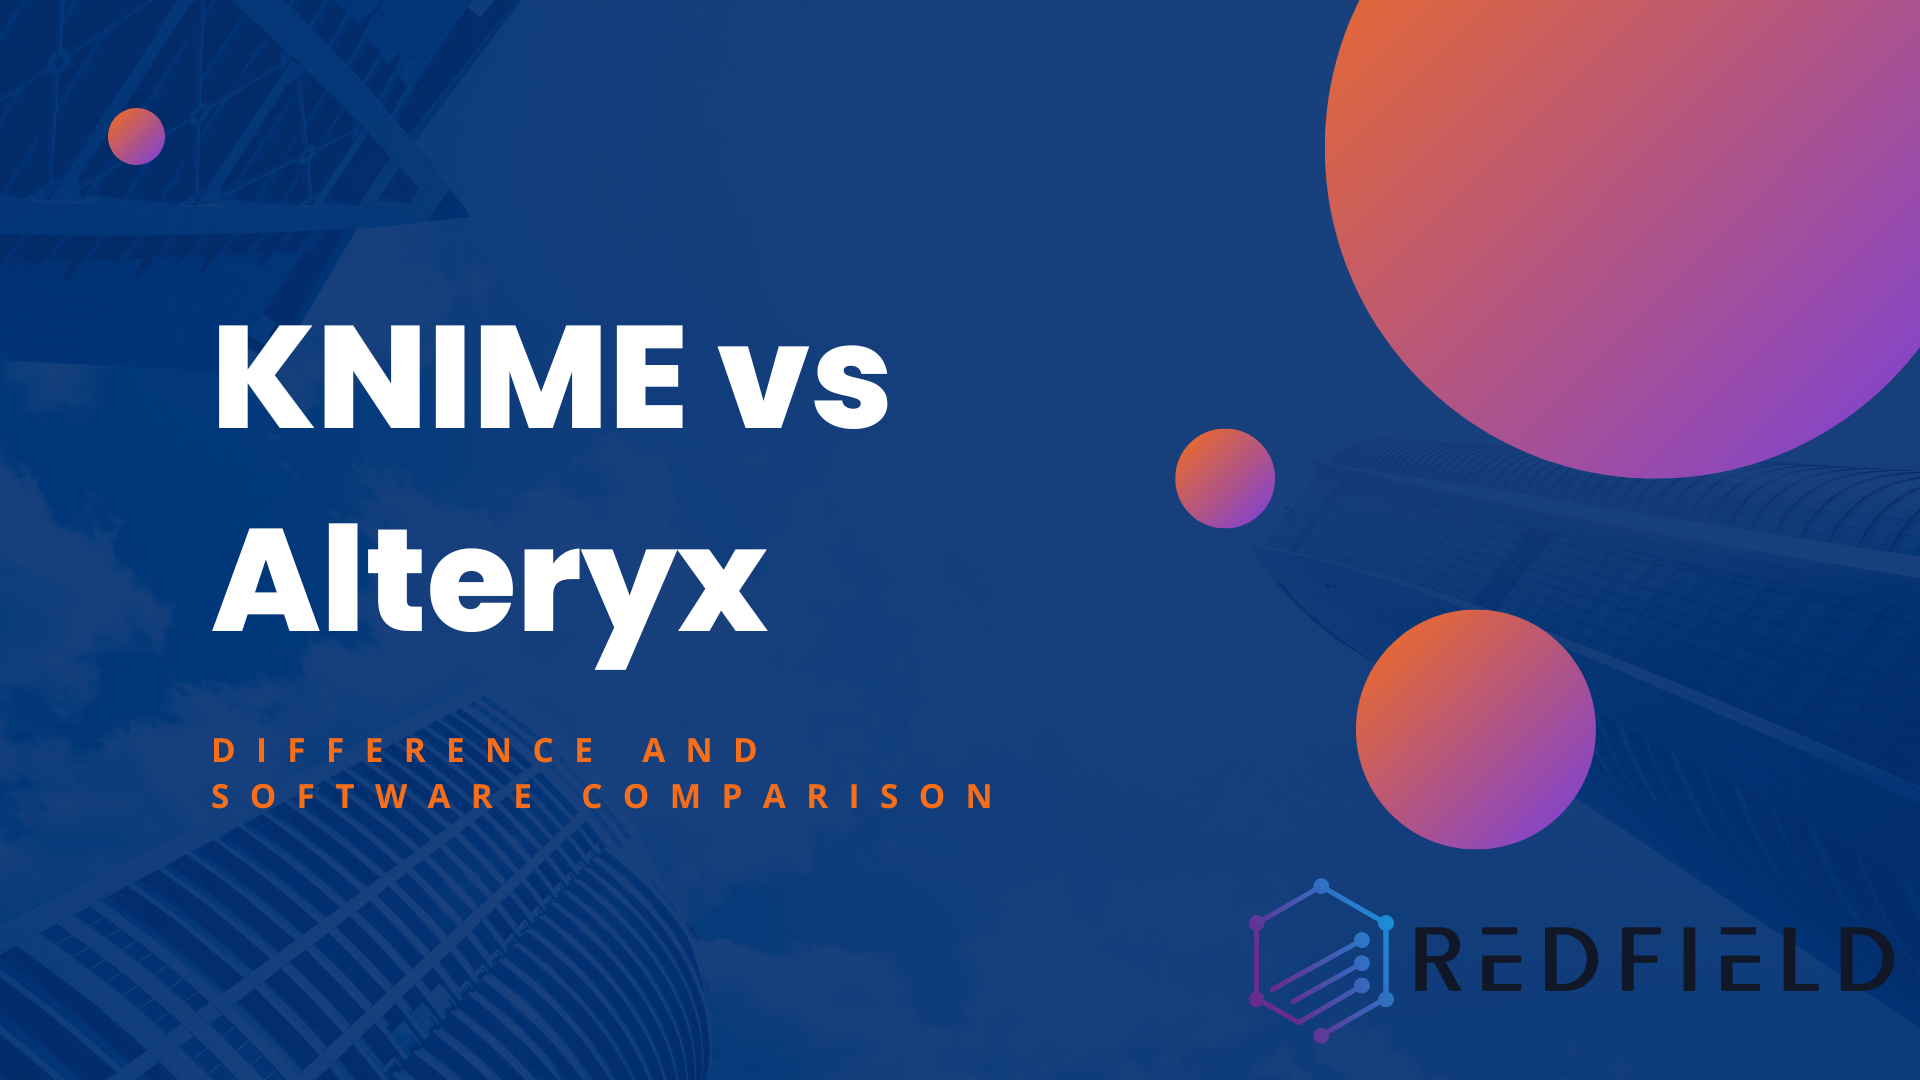 KNIME vs Alteryx: Difference and Software Comparison